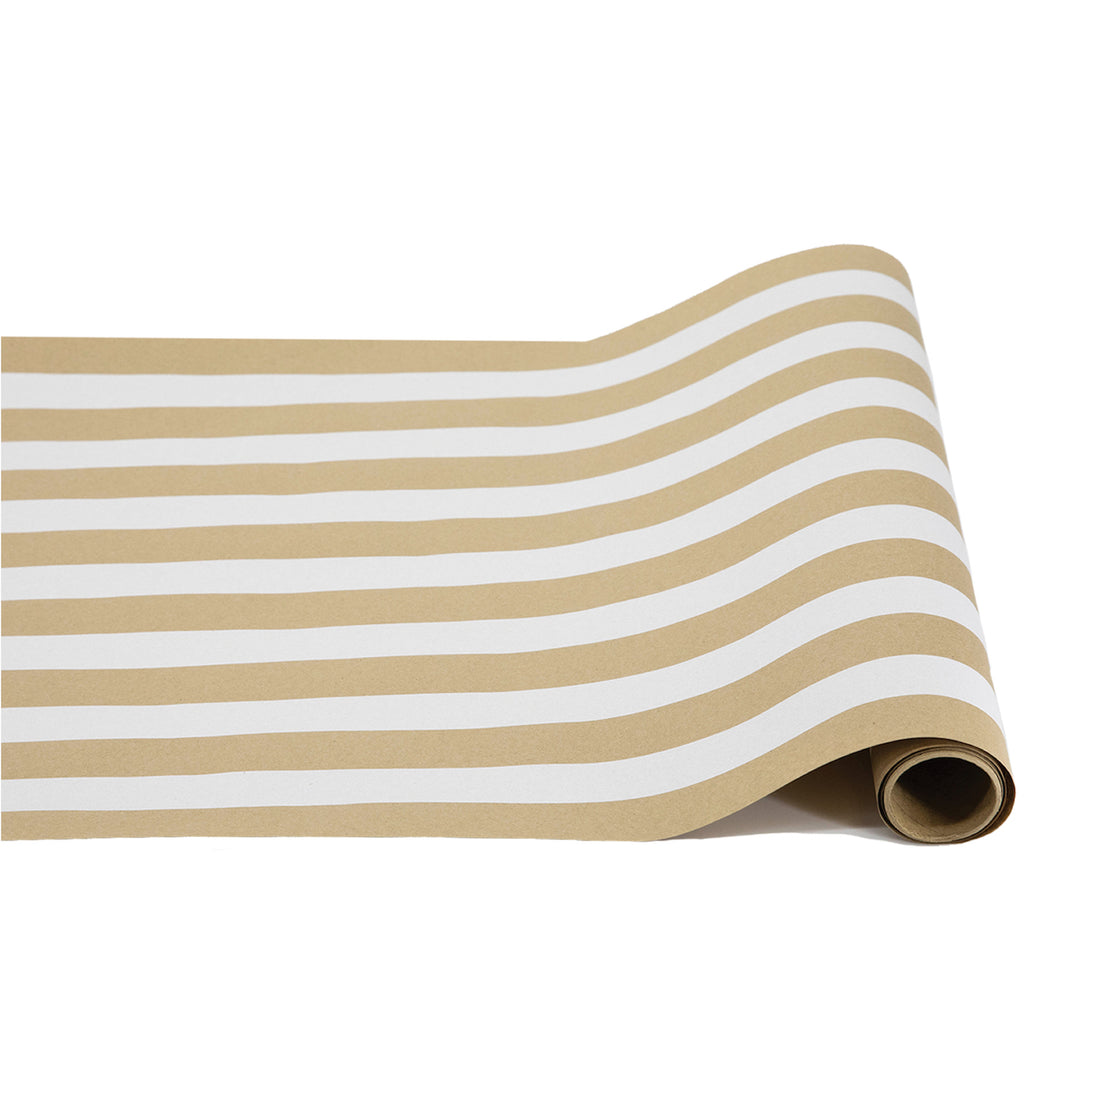 A paper roll with thick white and kraft stripes running down the length.